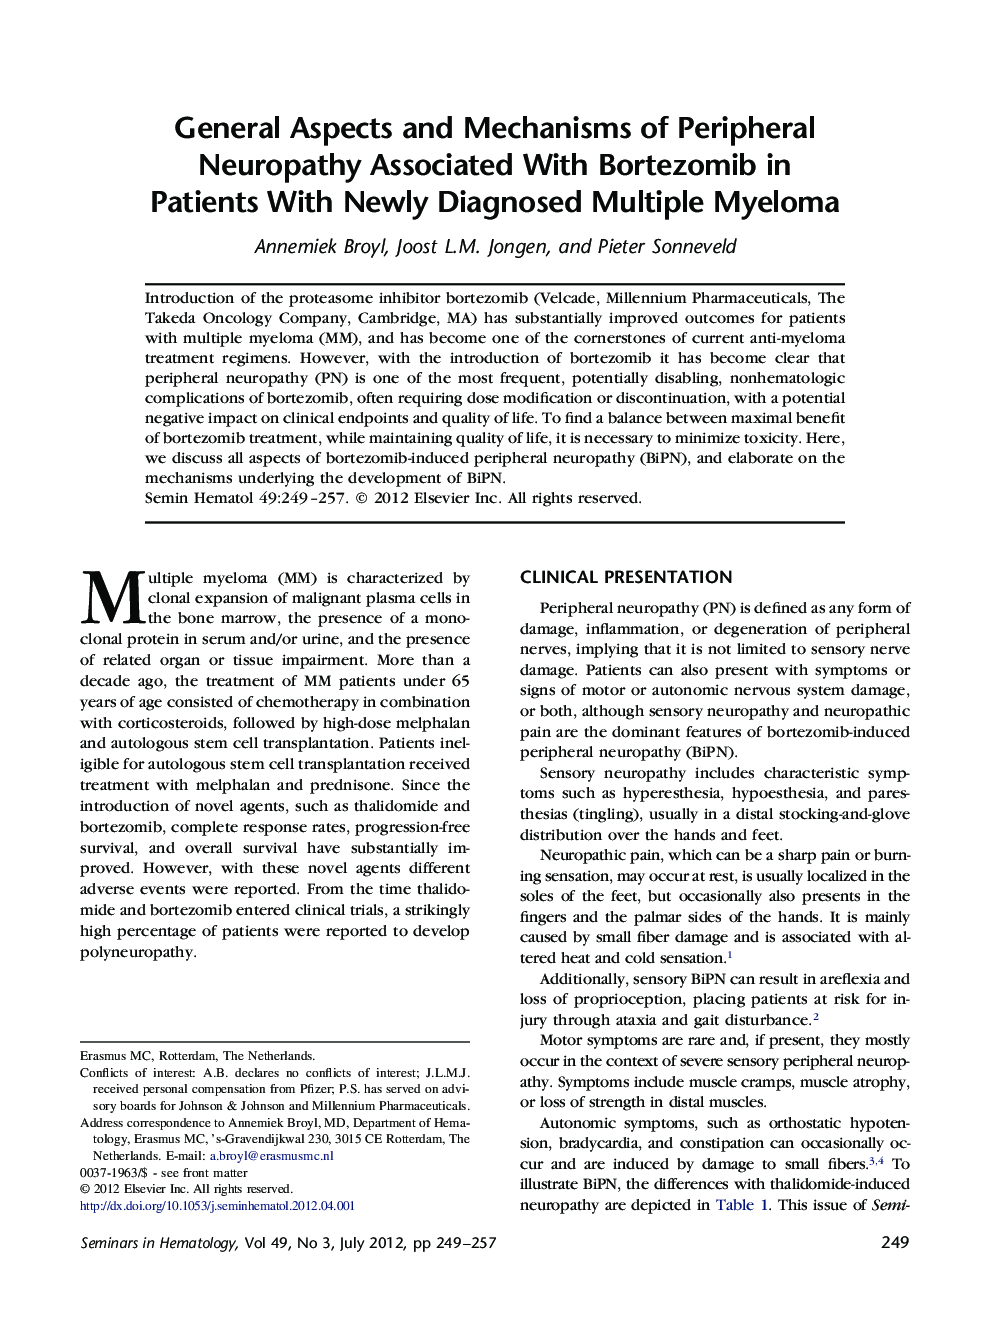 General Aspects and Mechanisms of Peripheral Neuropathy Associated With Bortezomib in Patients With Newly Diagnosed Multiple Myeloma 